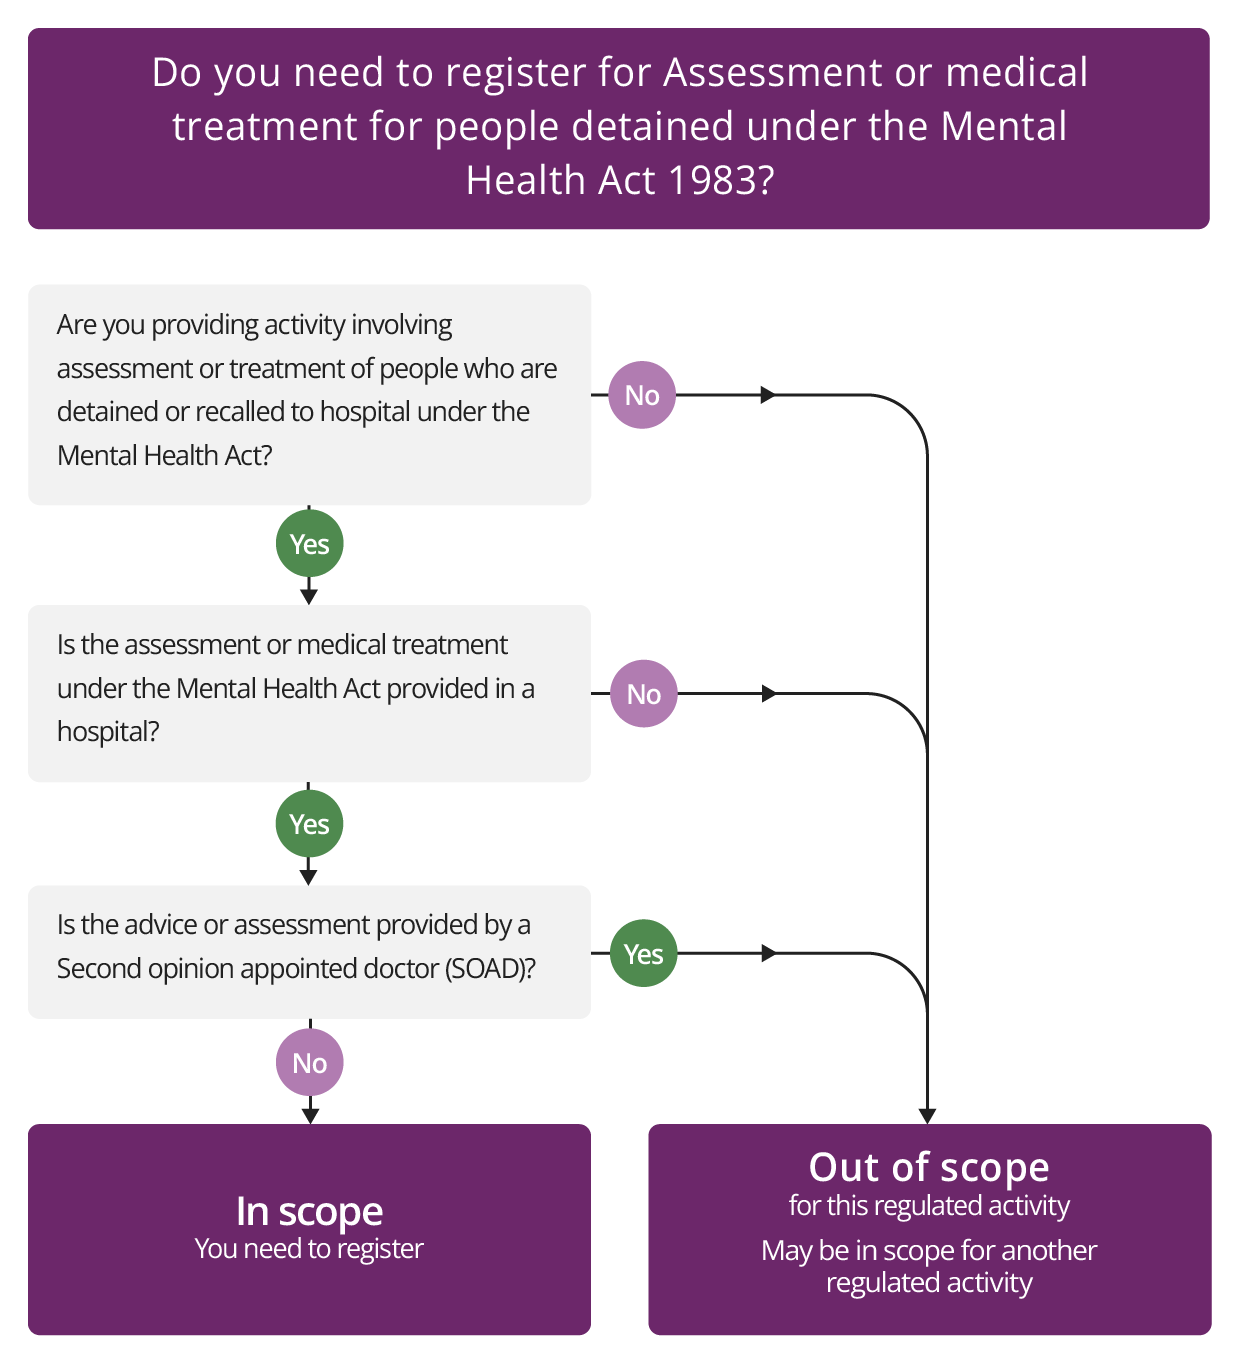 Diagram alternative to the written guidance for Assessment of medical treatment for people detained under the Mental Health Act 1983